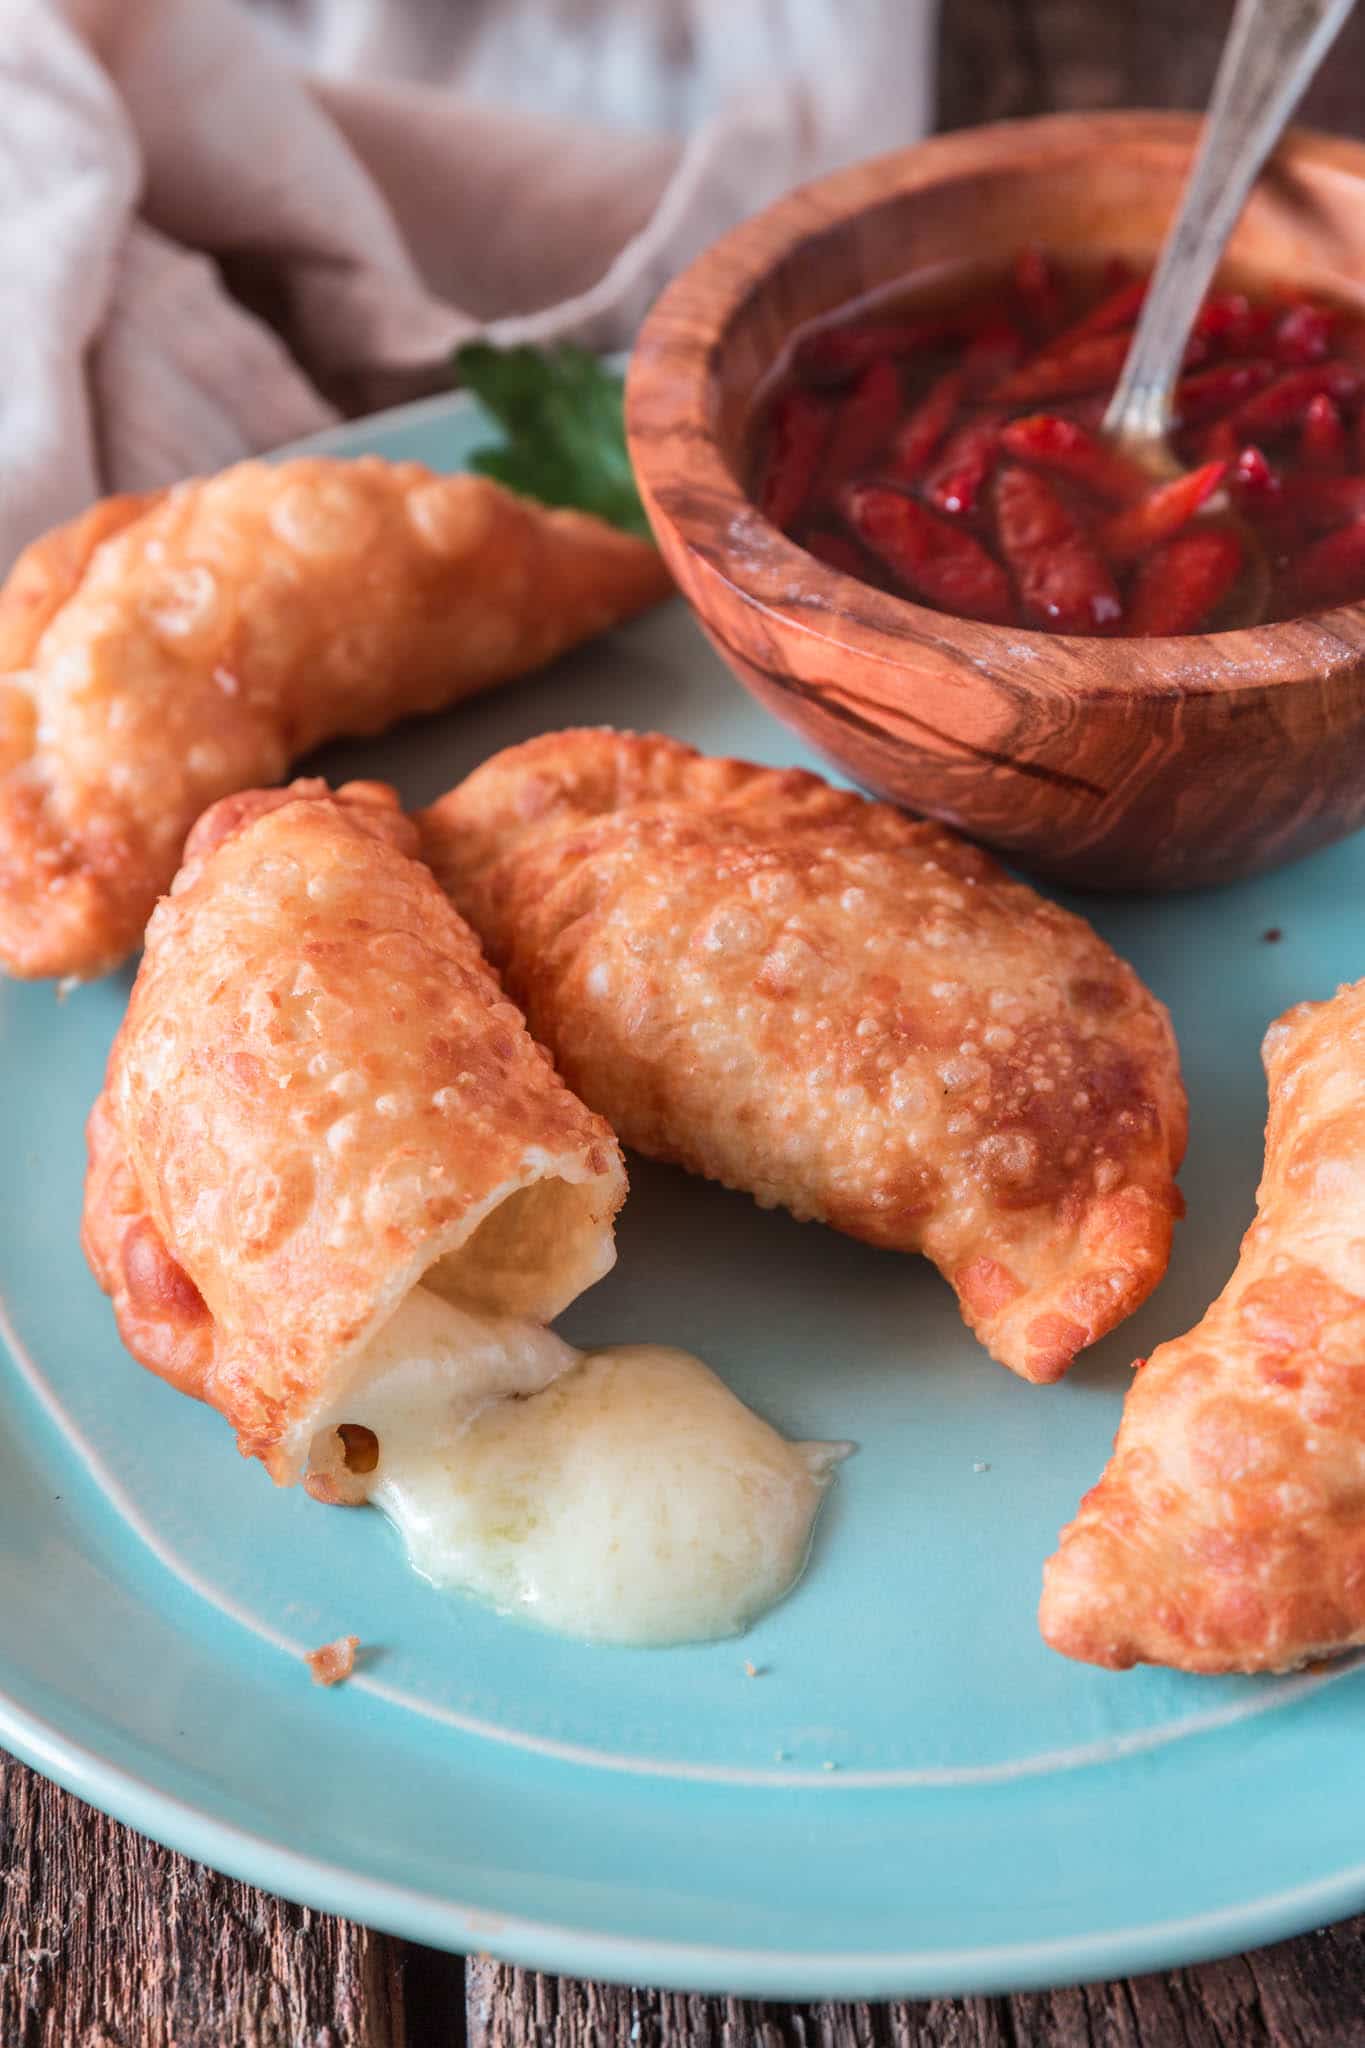 Brazilian Pastel (3 Fillings) | www.oliviascuisine.com | Brazil's most popular street food, pastel, is a treat you will never forget! Crispy, deep fried and bursting with delicious fillings. Absolutely irresistable! (Recipe and food photography by @oliviascuisine.)